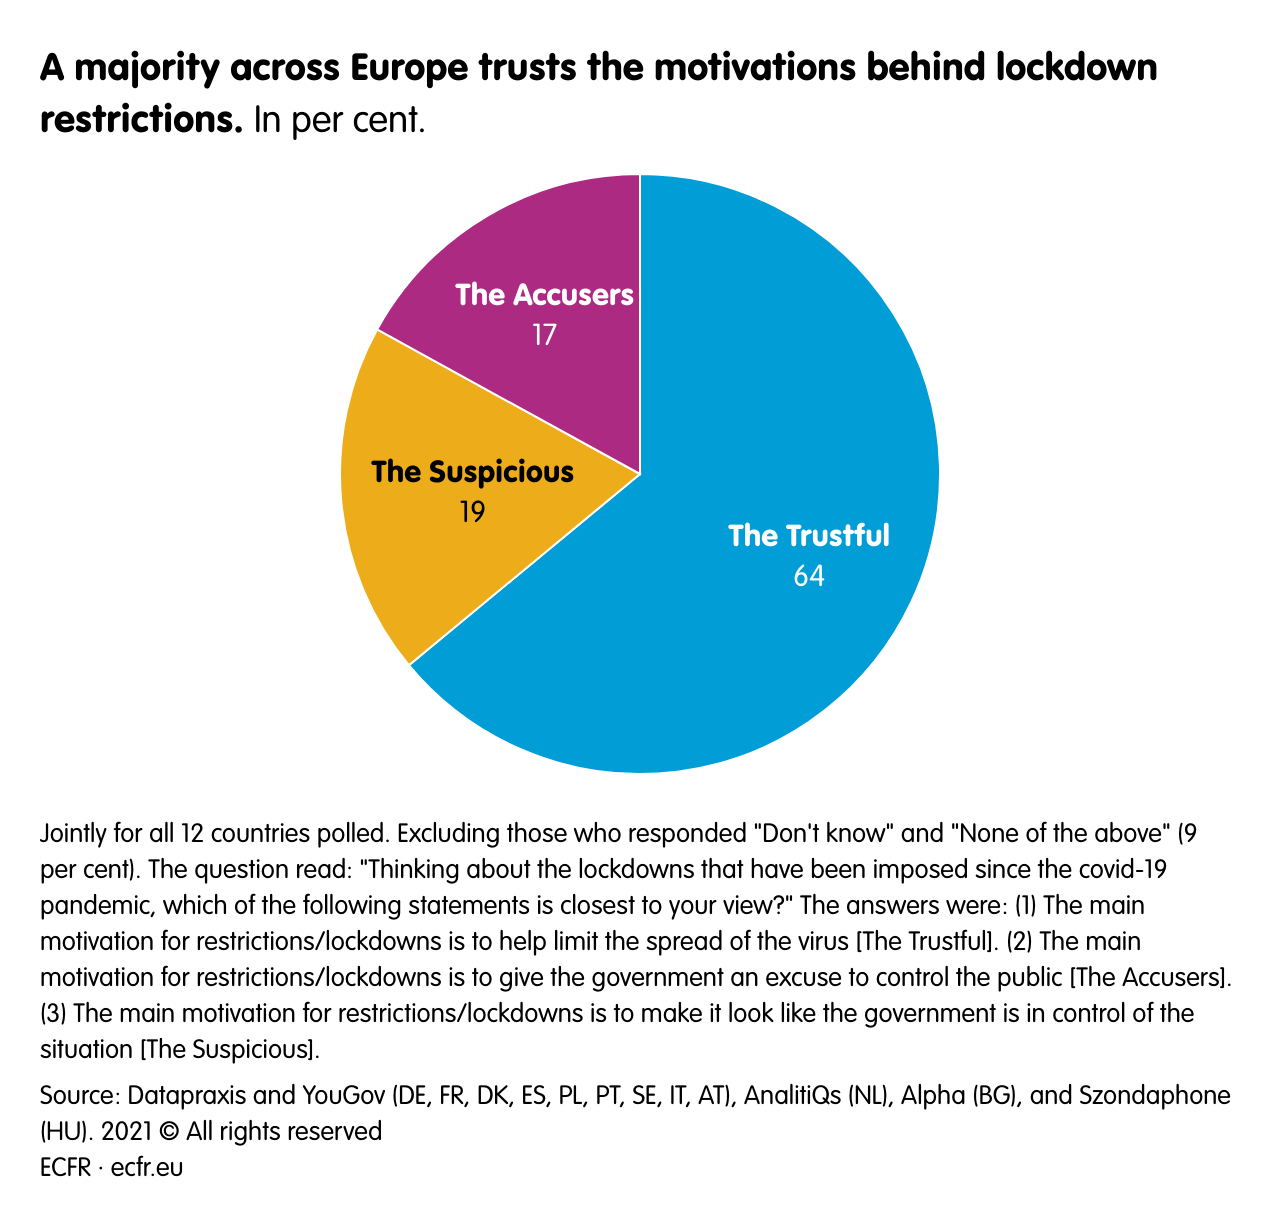 A majority across Europe trusts the motivations behind lockdown restrictions. 